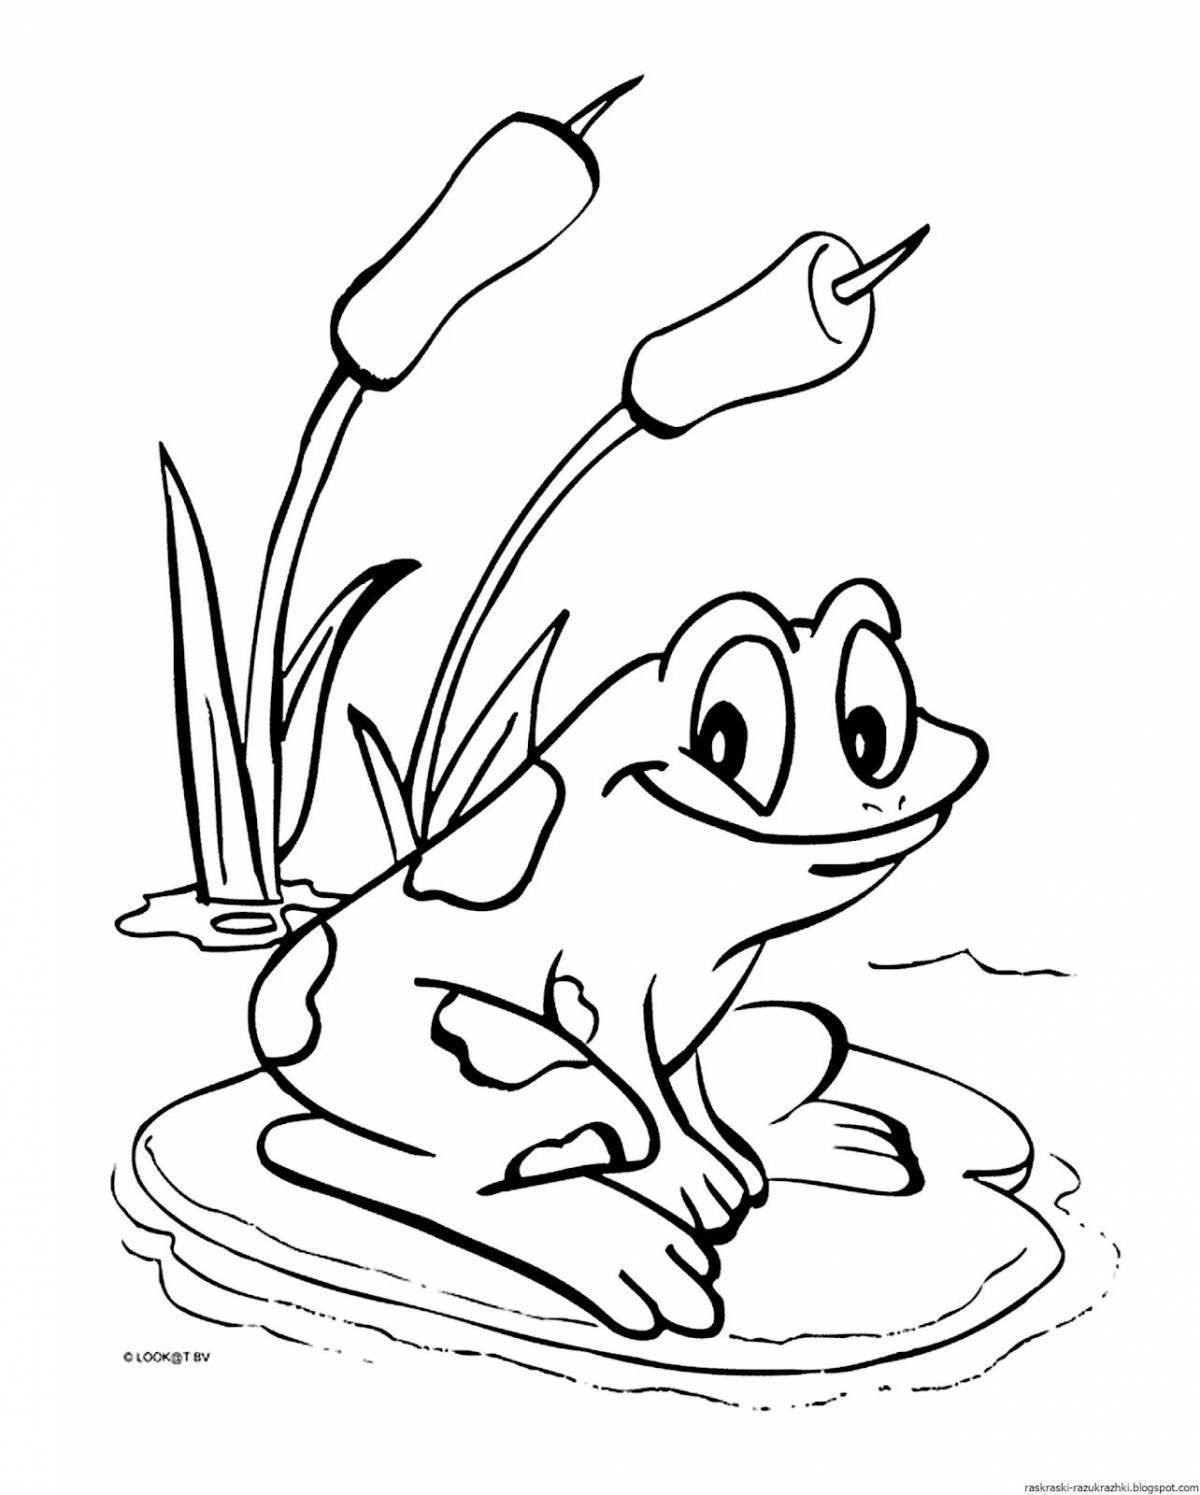 Fairy frog coloring book for kids